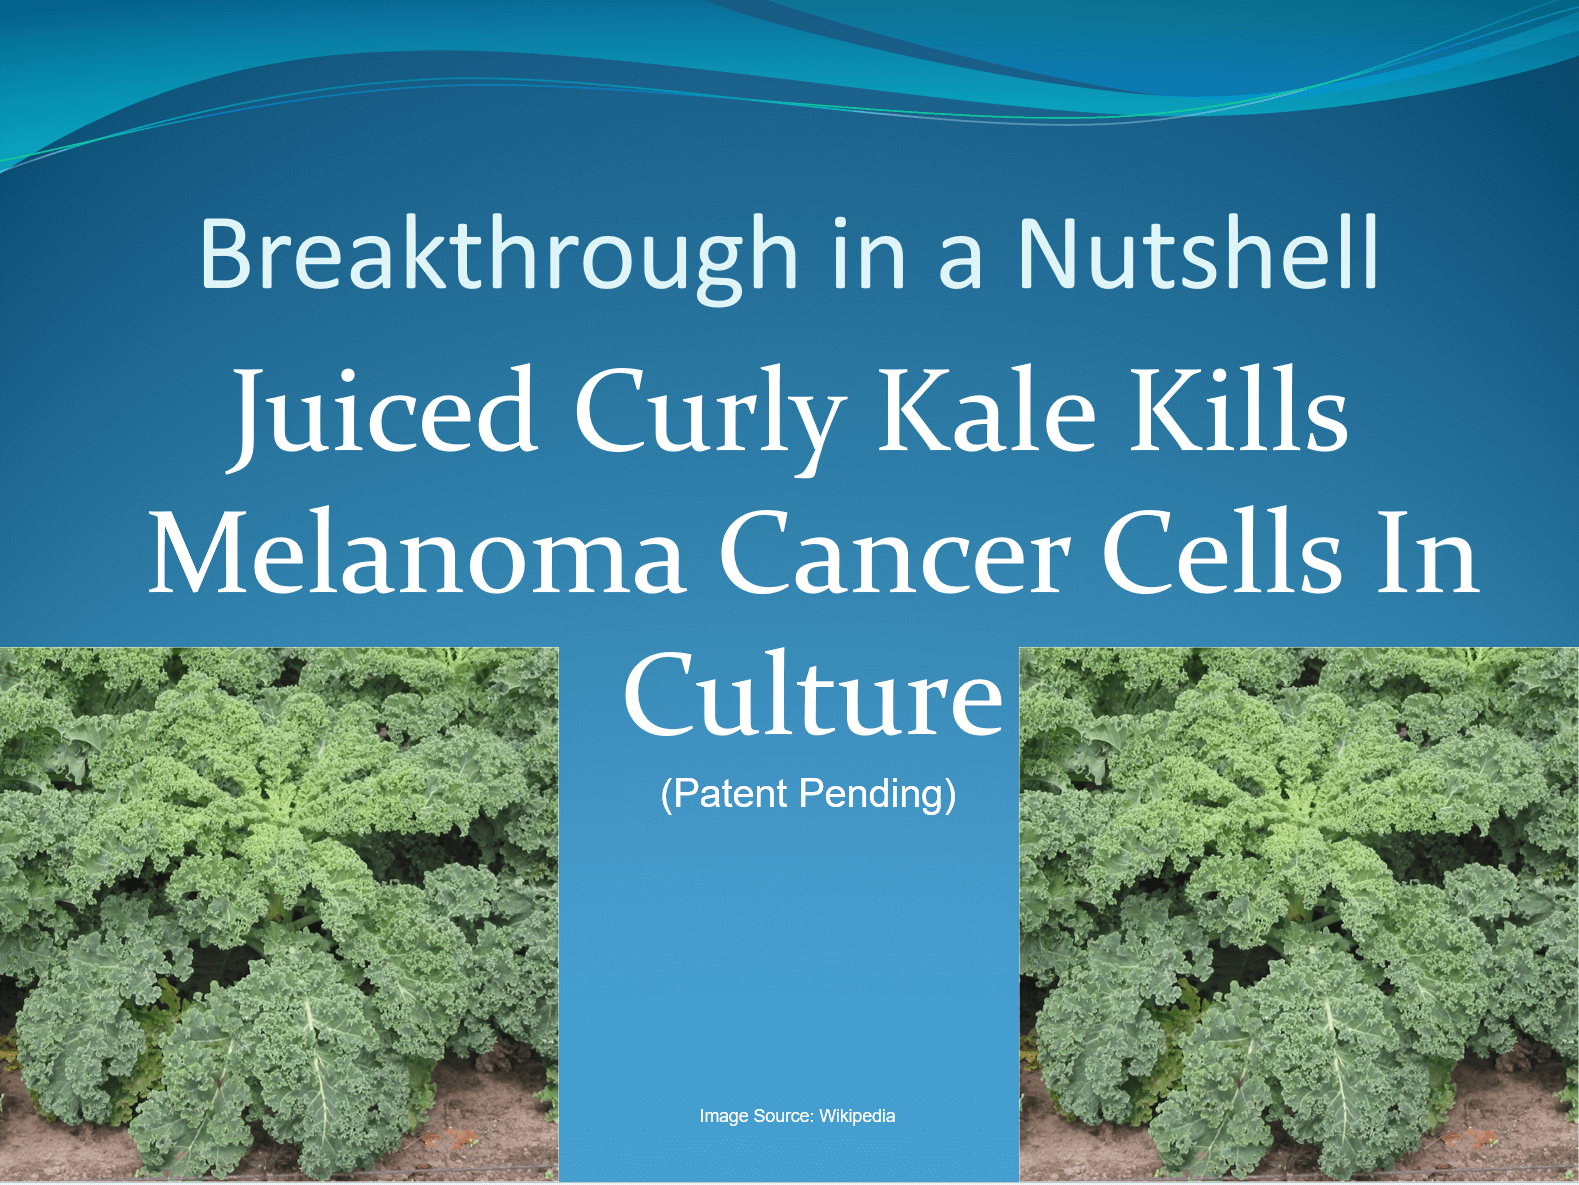 PowerPoint slide from Bilal Qizilbash's 2016 Innovate MS Talk showcasing his cancer breakthrough with kale in a nutshell.